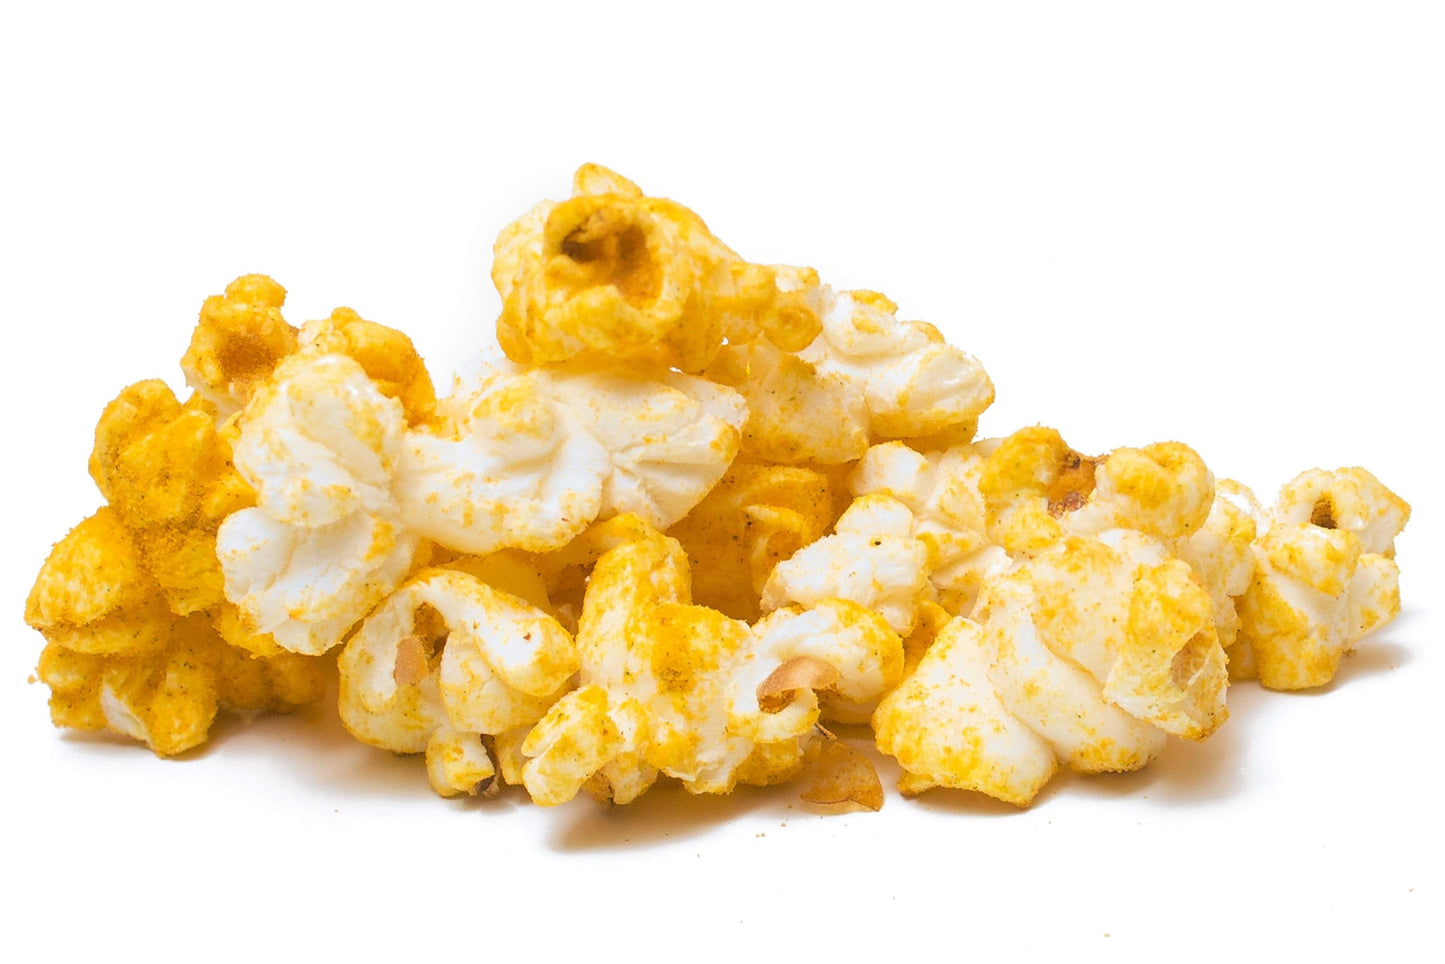 popped las vegas Add Some Heat to Your Snack Game with POPPED LAS VEGAS Hot Stuff | Jalapeno & Cheese Gourmet Popcorn! Elevate Your Taste Buds with this Spicy and Cheesy Delight. Handcrafted with Premium Ingredients for Maximum Flavor and Crunch. Satisfy Your Cravings with the Perfect Blend of Heat and Cheese. Order Now for an Unforgettable Snacking Experience